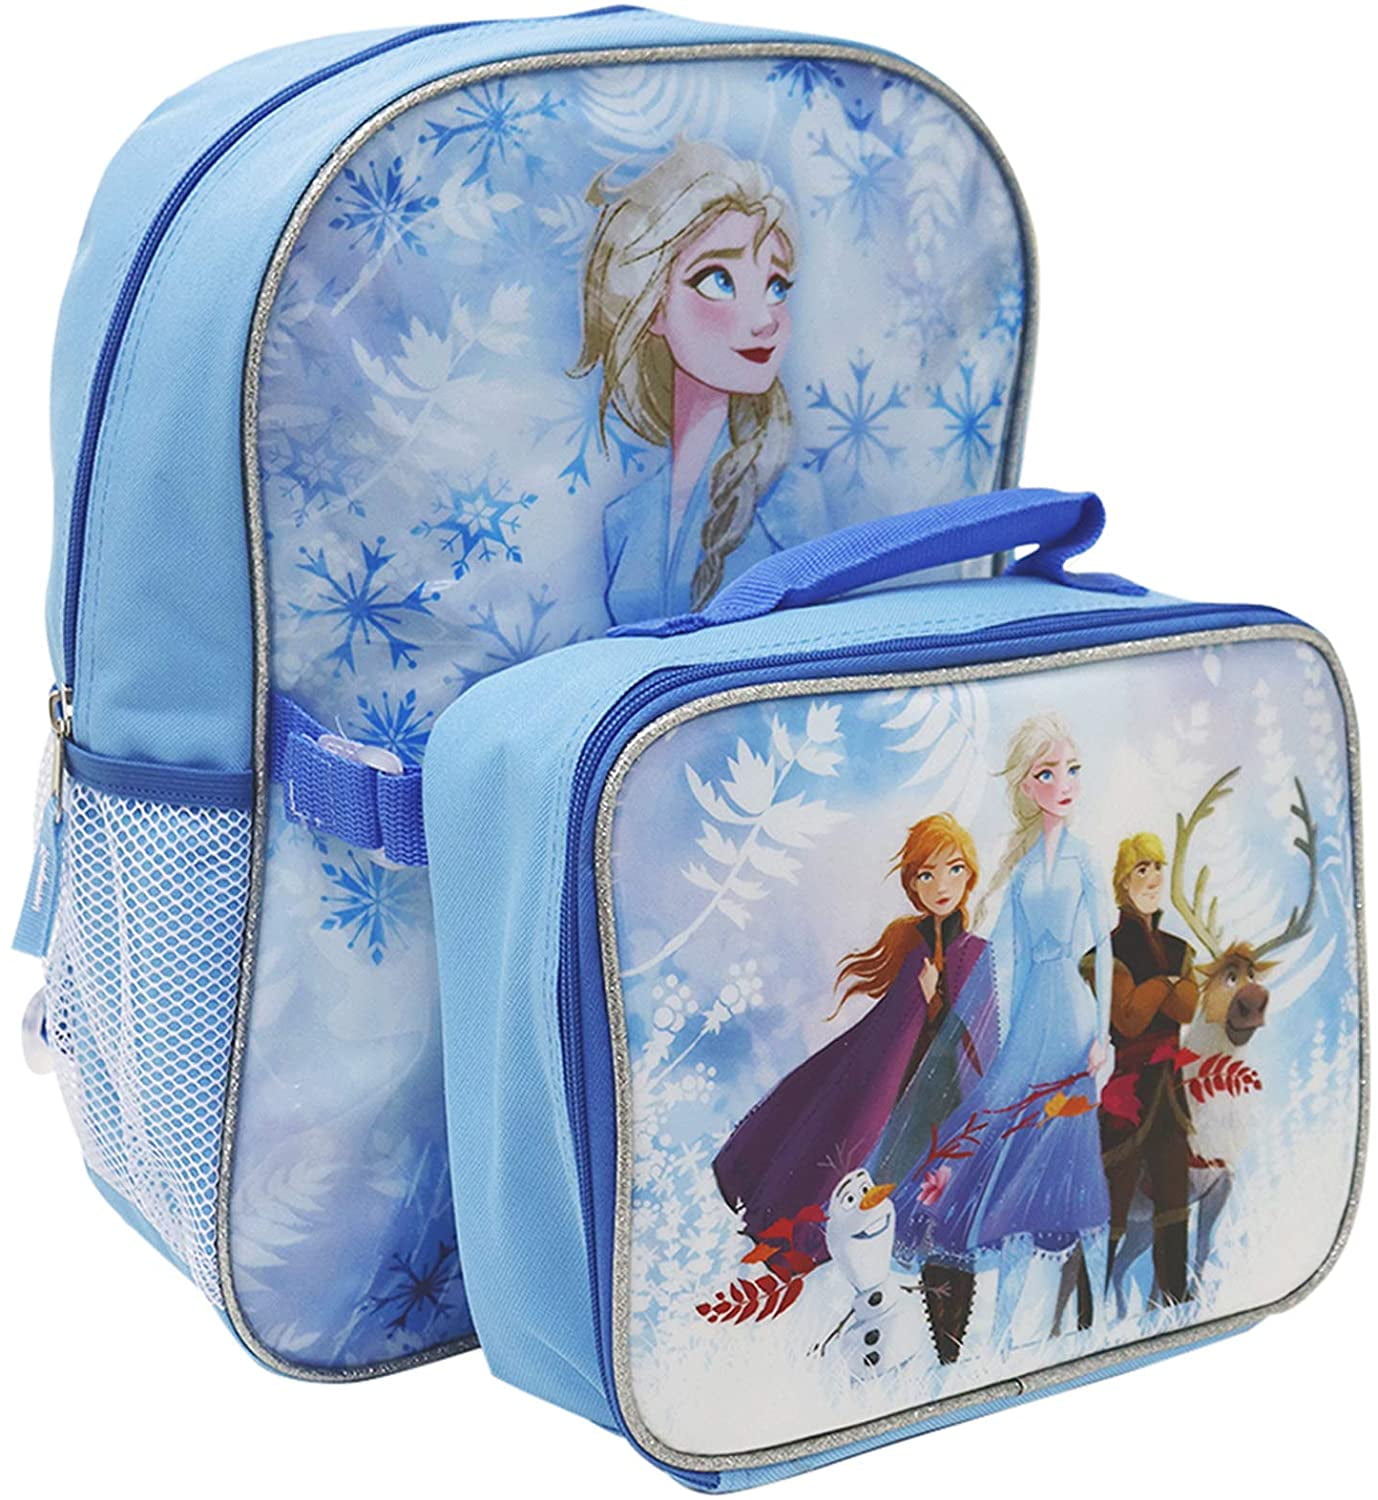 Hologram Effect Premium Backpack Disney Frozen 2 Latest Movie 3D Picture of Elsa & Anna for School/Nursery/Travel Rucksack with Extra Large Picture 